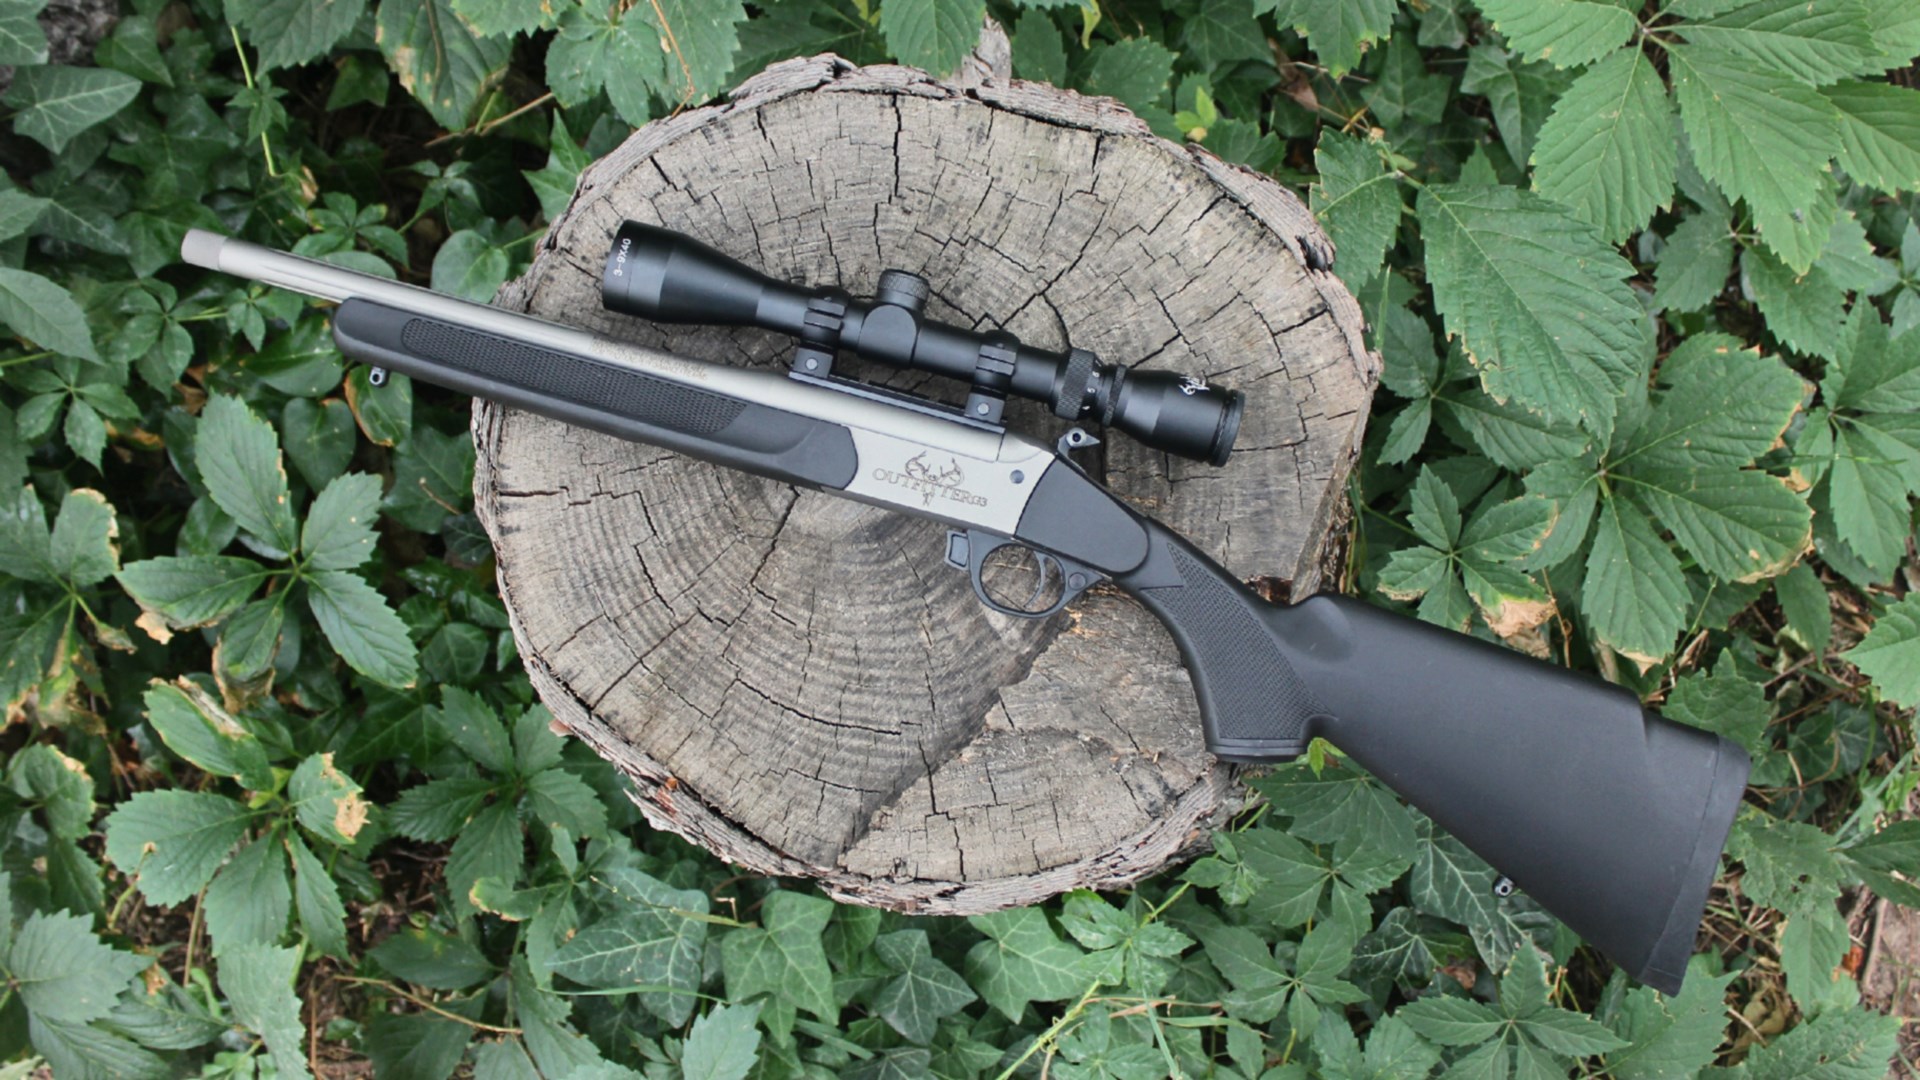 Traditions Outfitter G3 single-shot rifle left-side view shown on log with green leaves surrounding